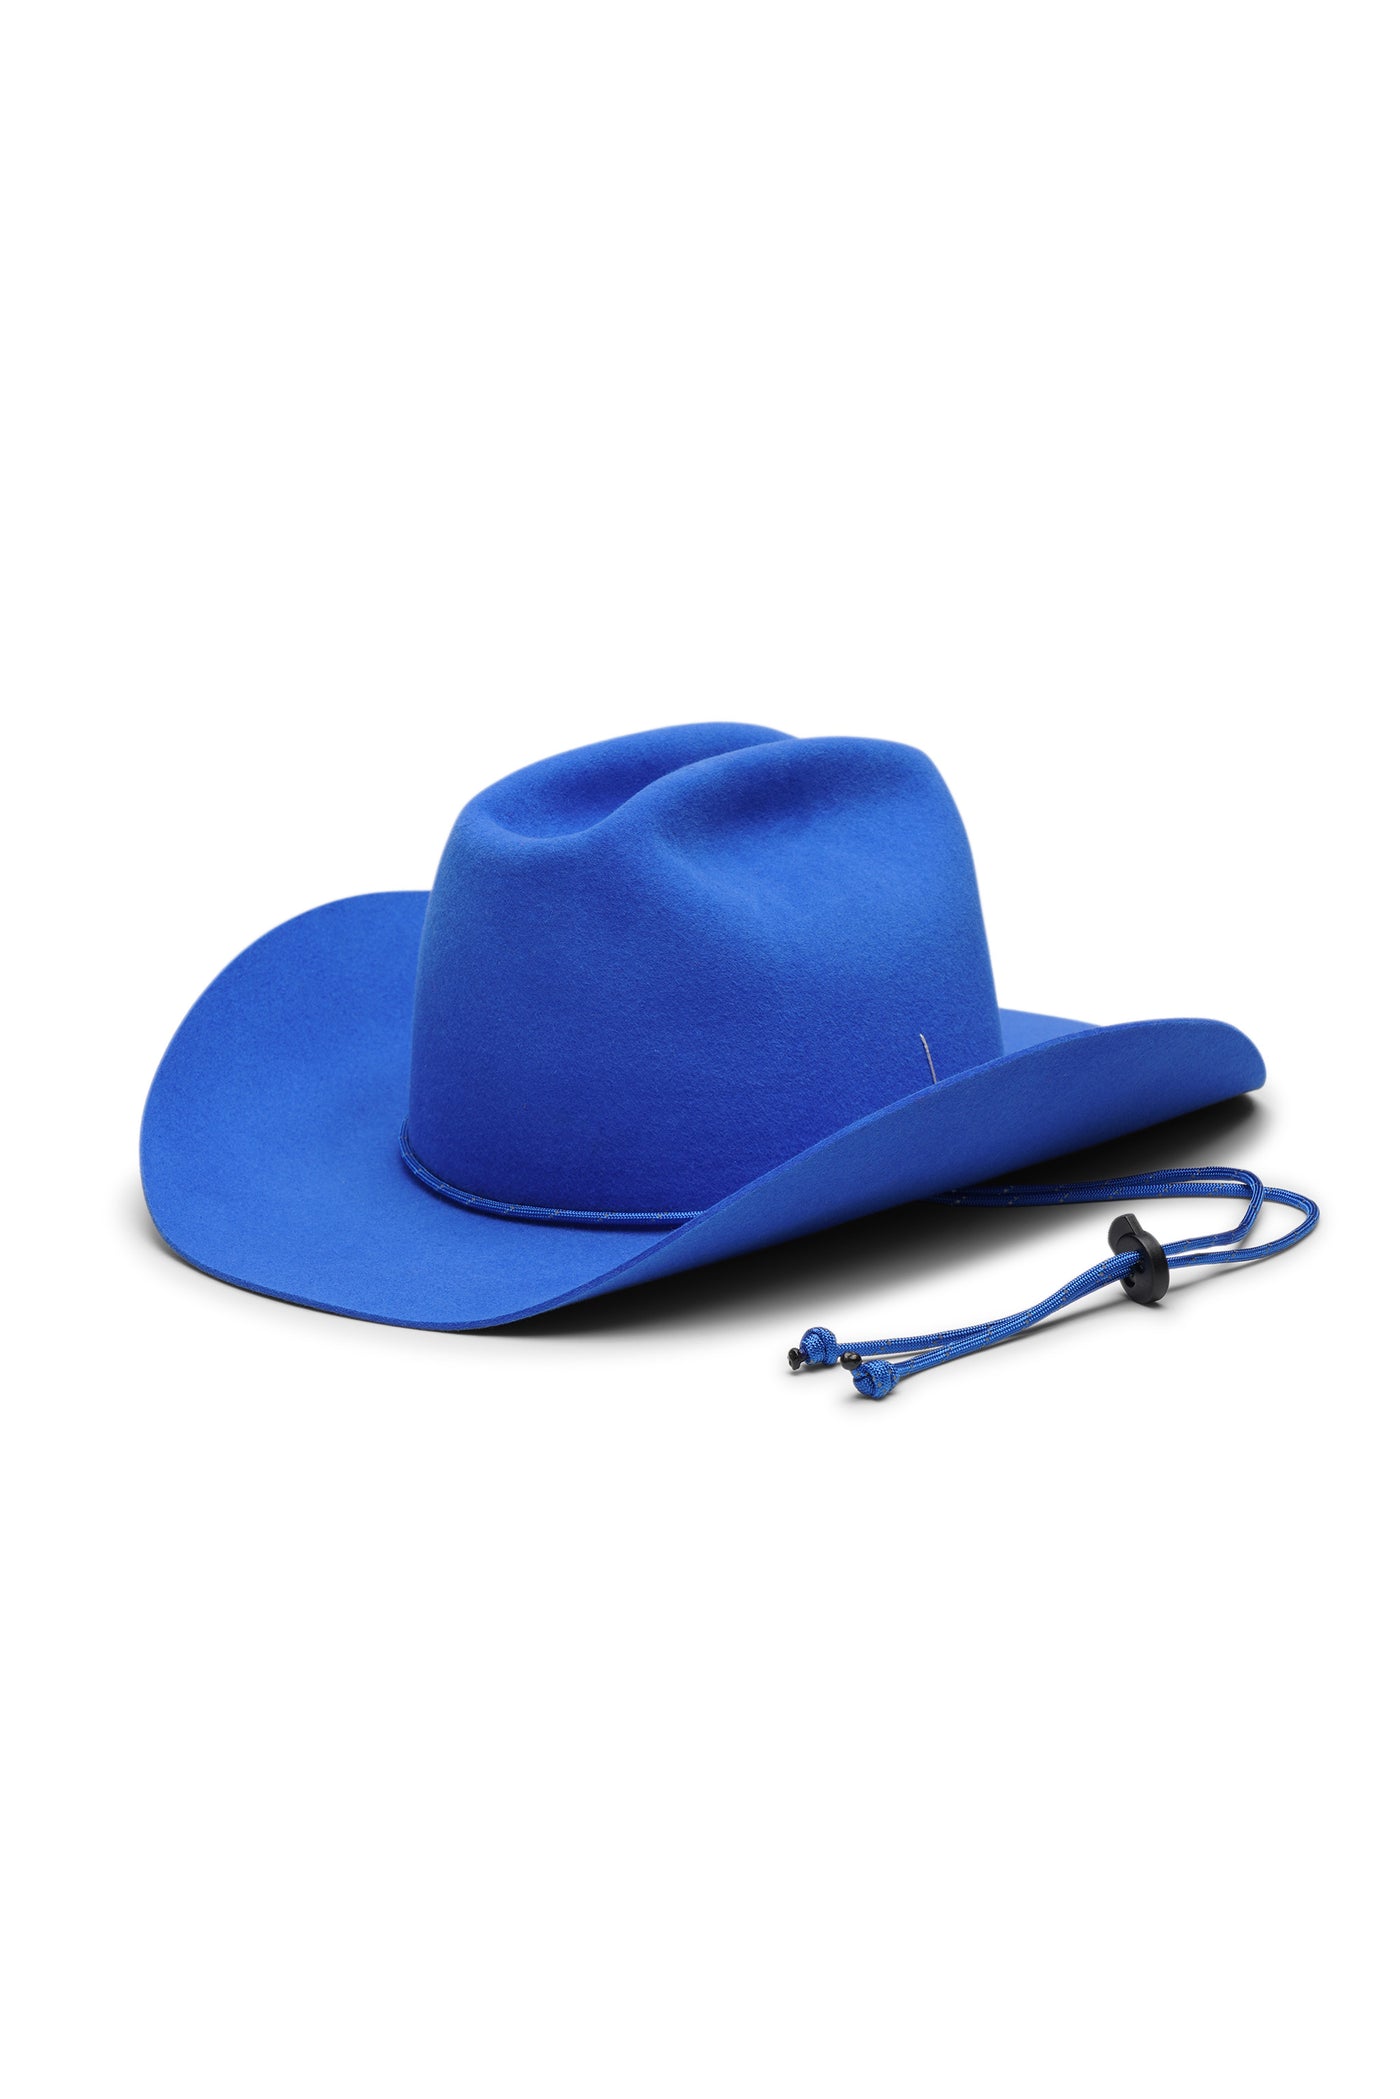 Blue cowboy 100% fur felt hat with a wide brim and center crease. Paracord chin strap detail in blue and reflective. Unisex hat style in various sizes and colors. We ship worldwide. Shop now. Each SoonNoon hat is handmade with unique character in Stockholm, Sweden.